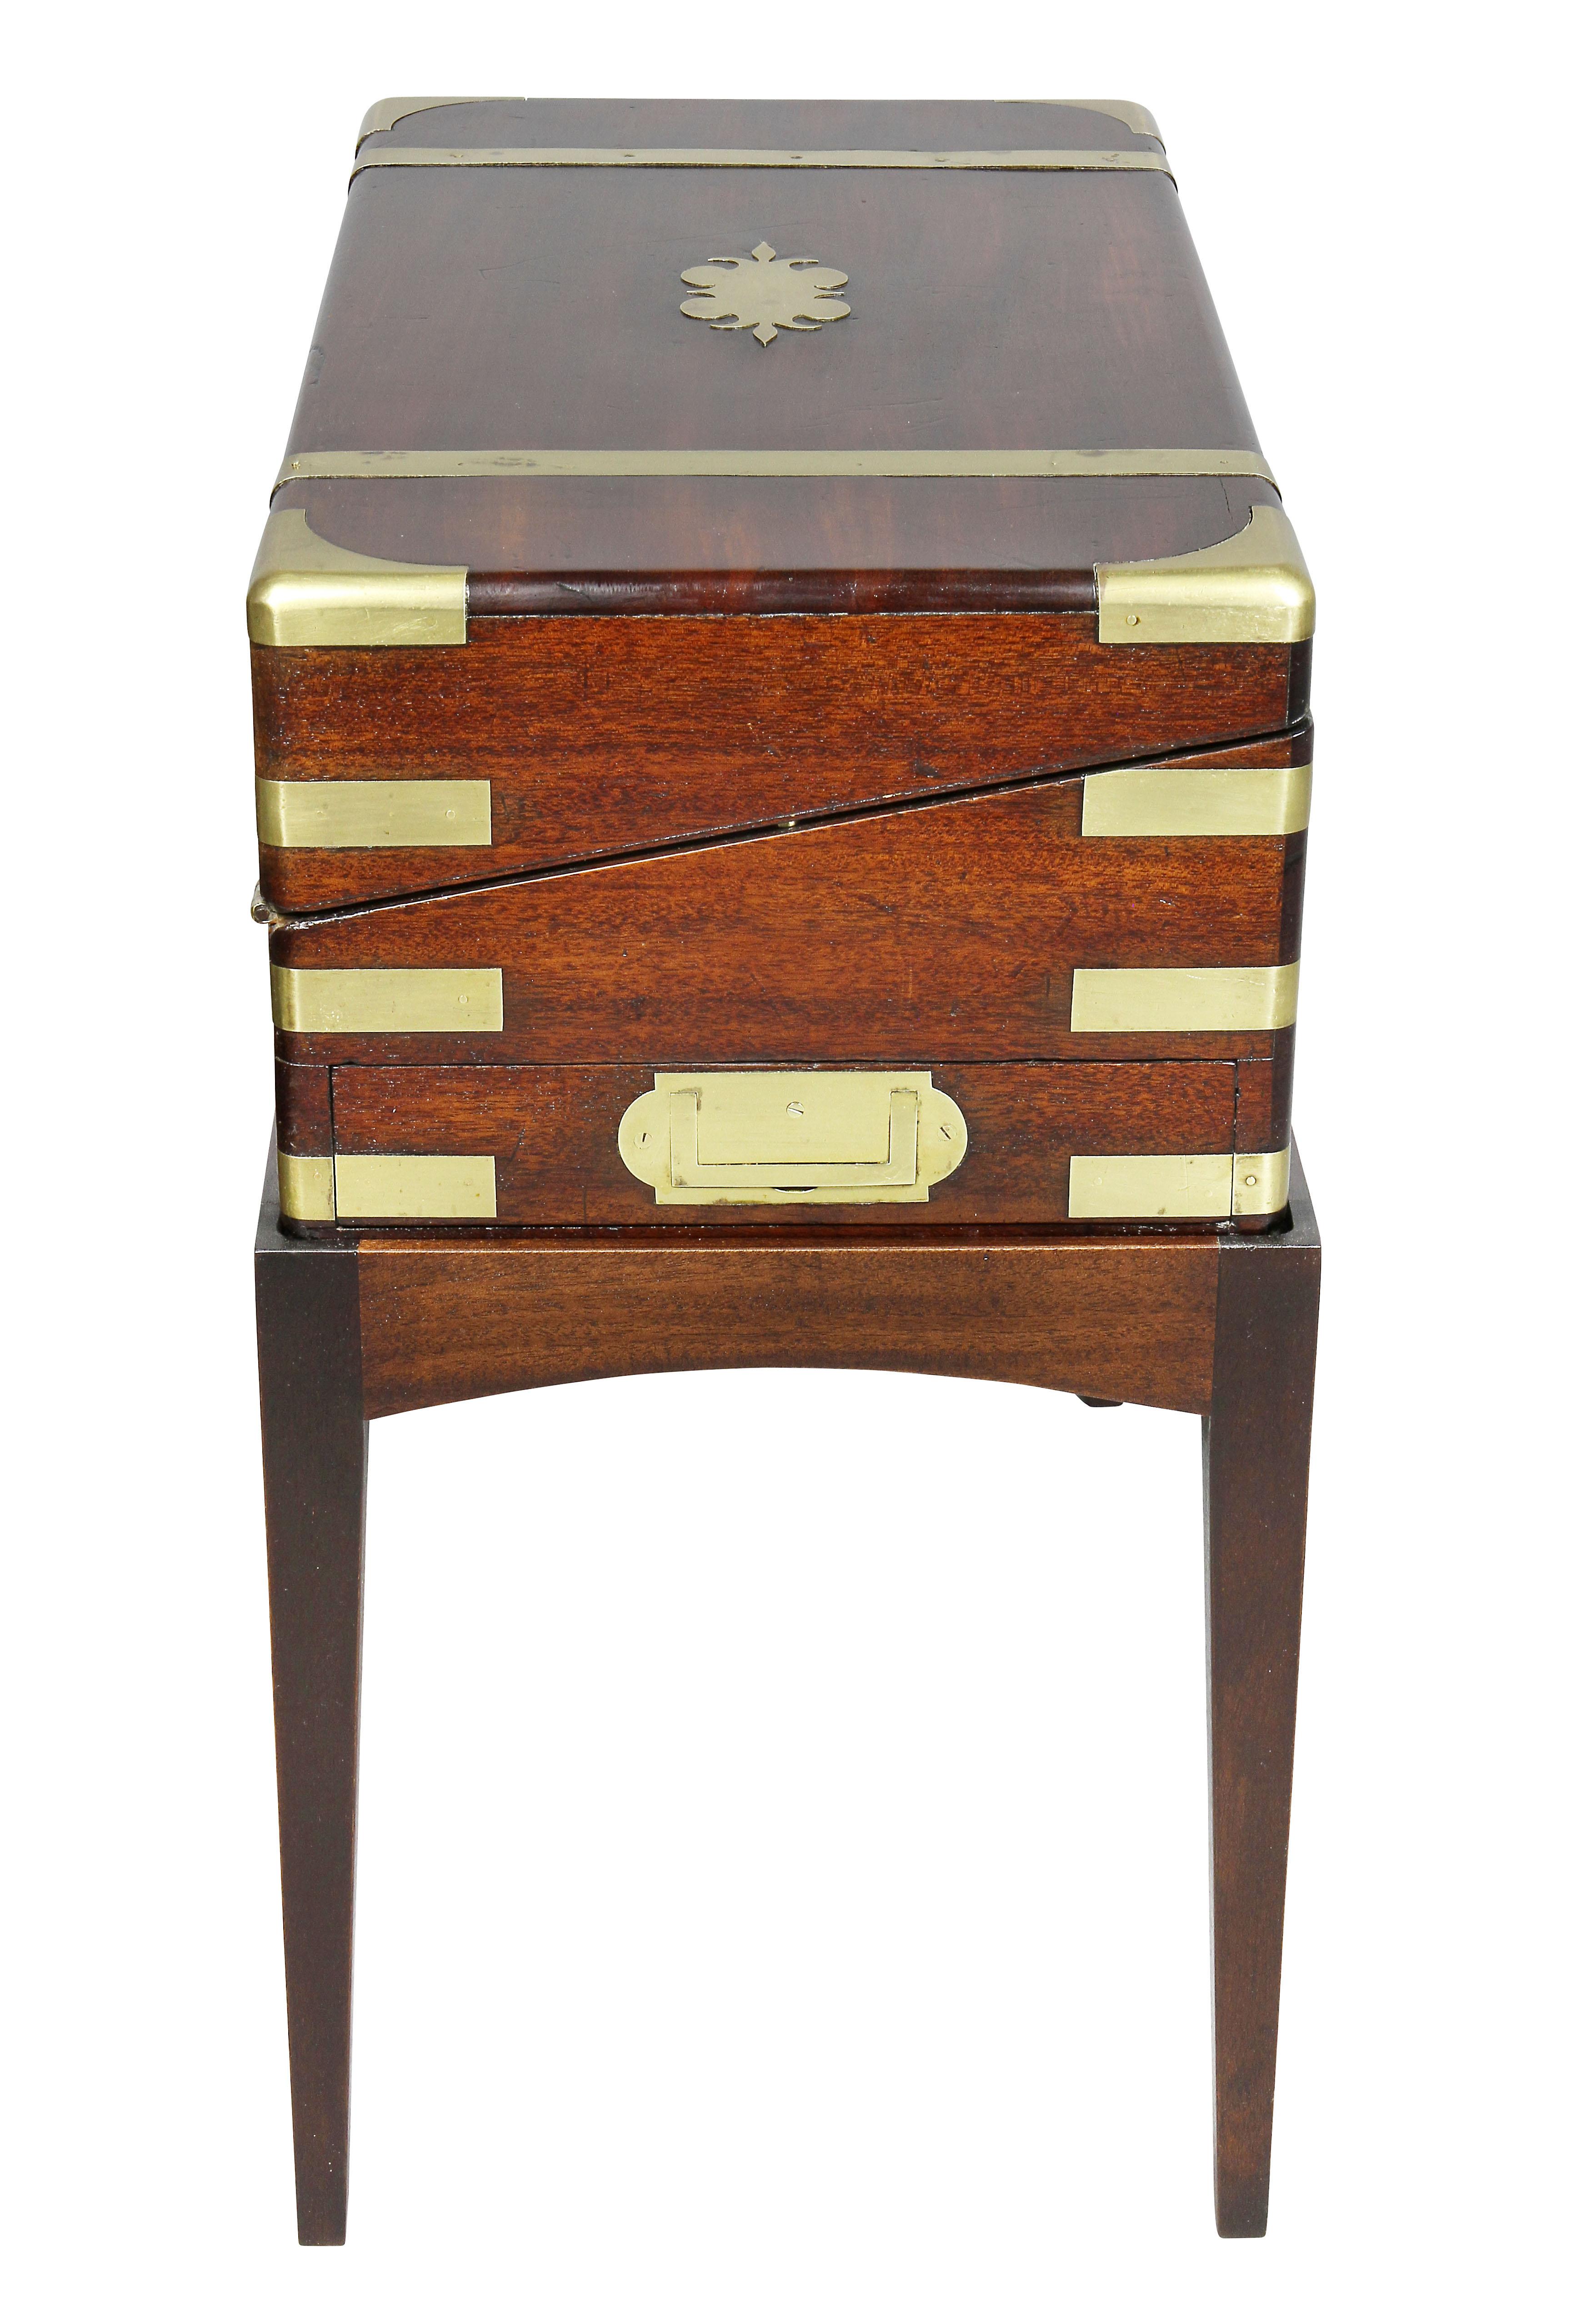 Late Regency Rosewood and Brass Mounted Lap Desk on Stand 2